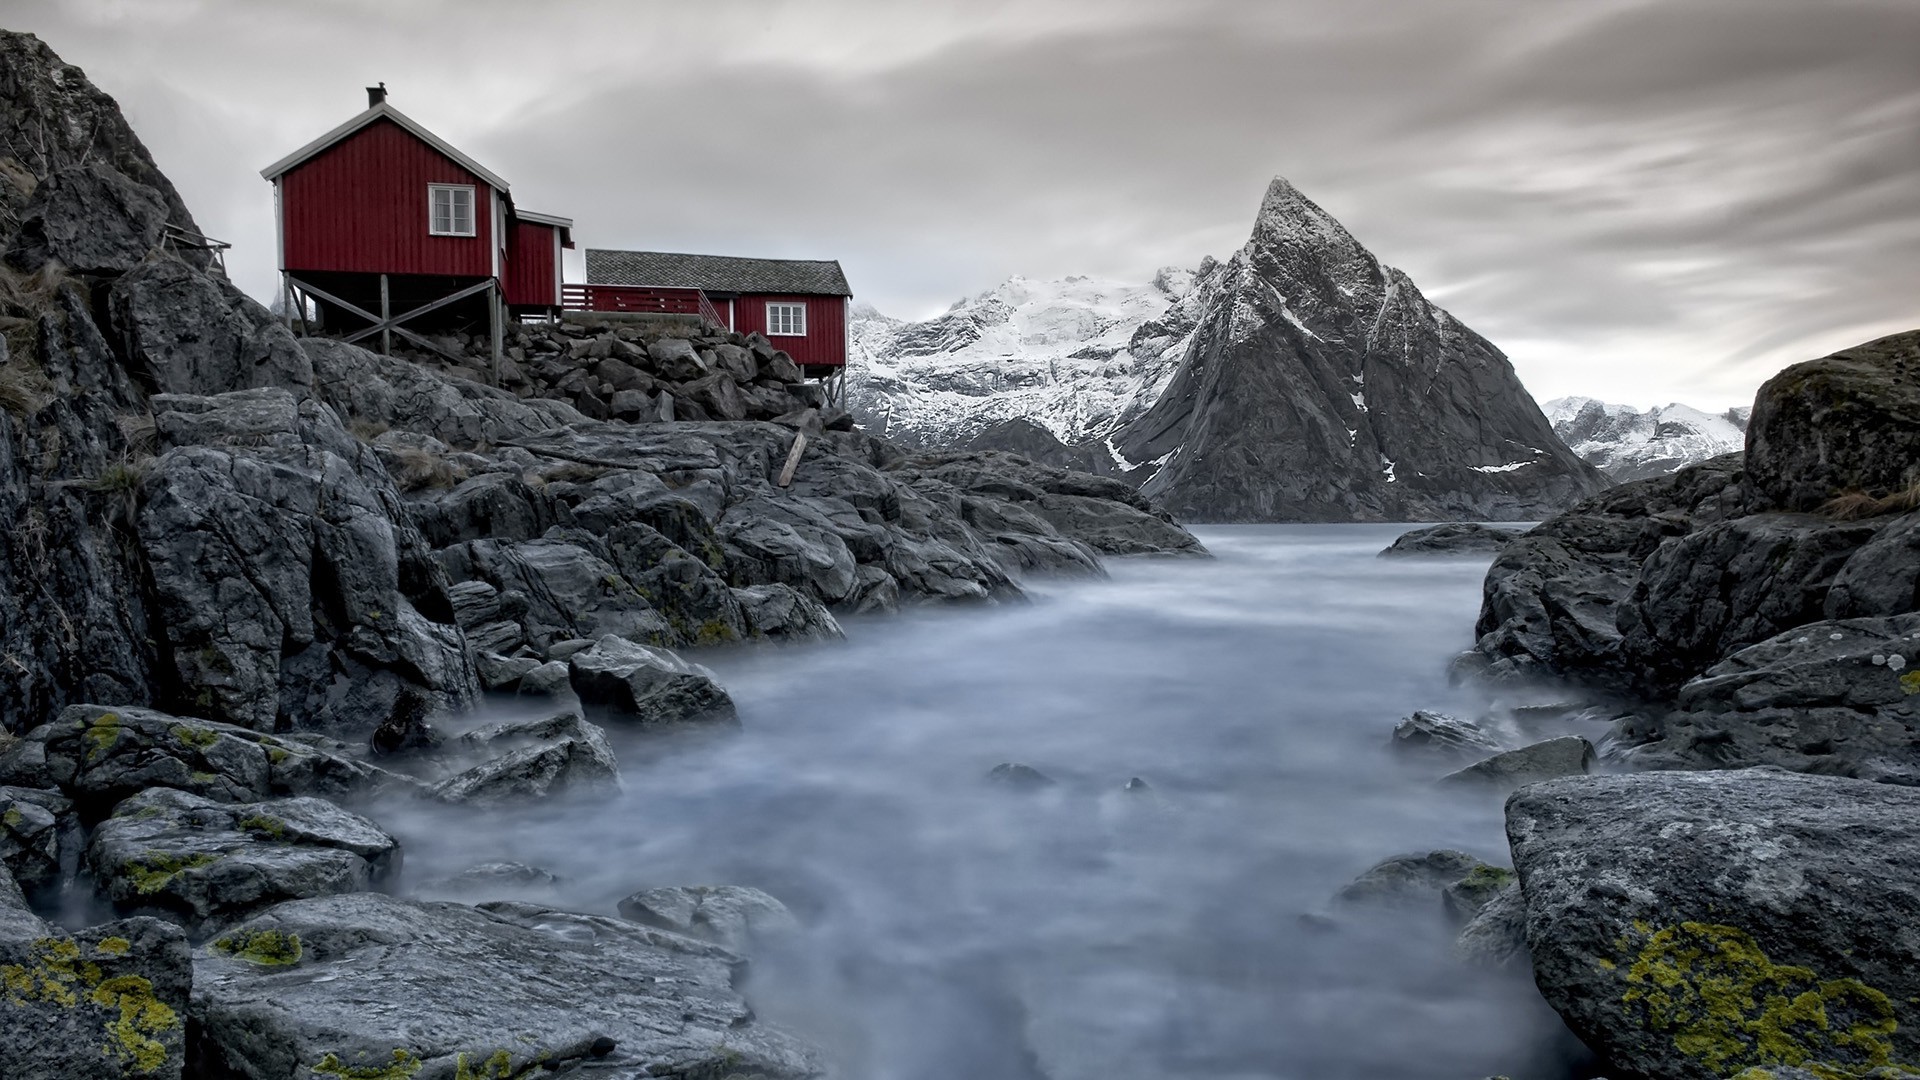 wood, House, Nature, Landscape, Norway, Mountain, Rock, River, Snow, Clouds, Long Exposure Wallpaper